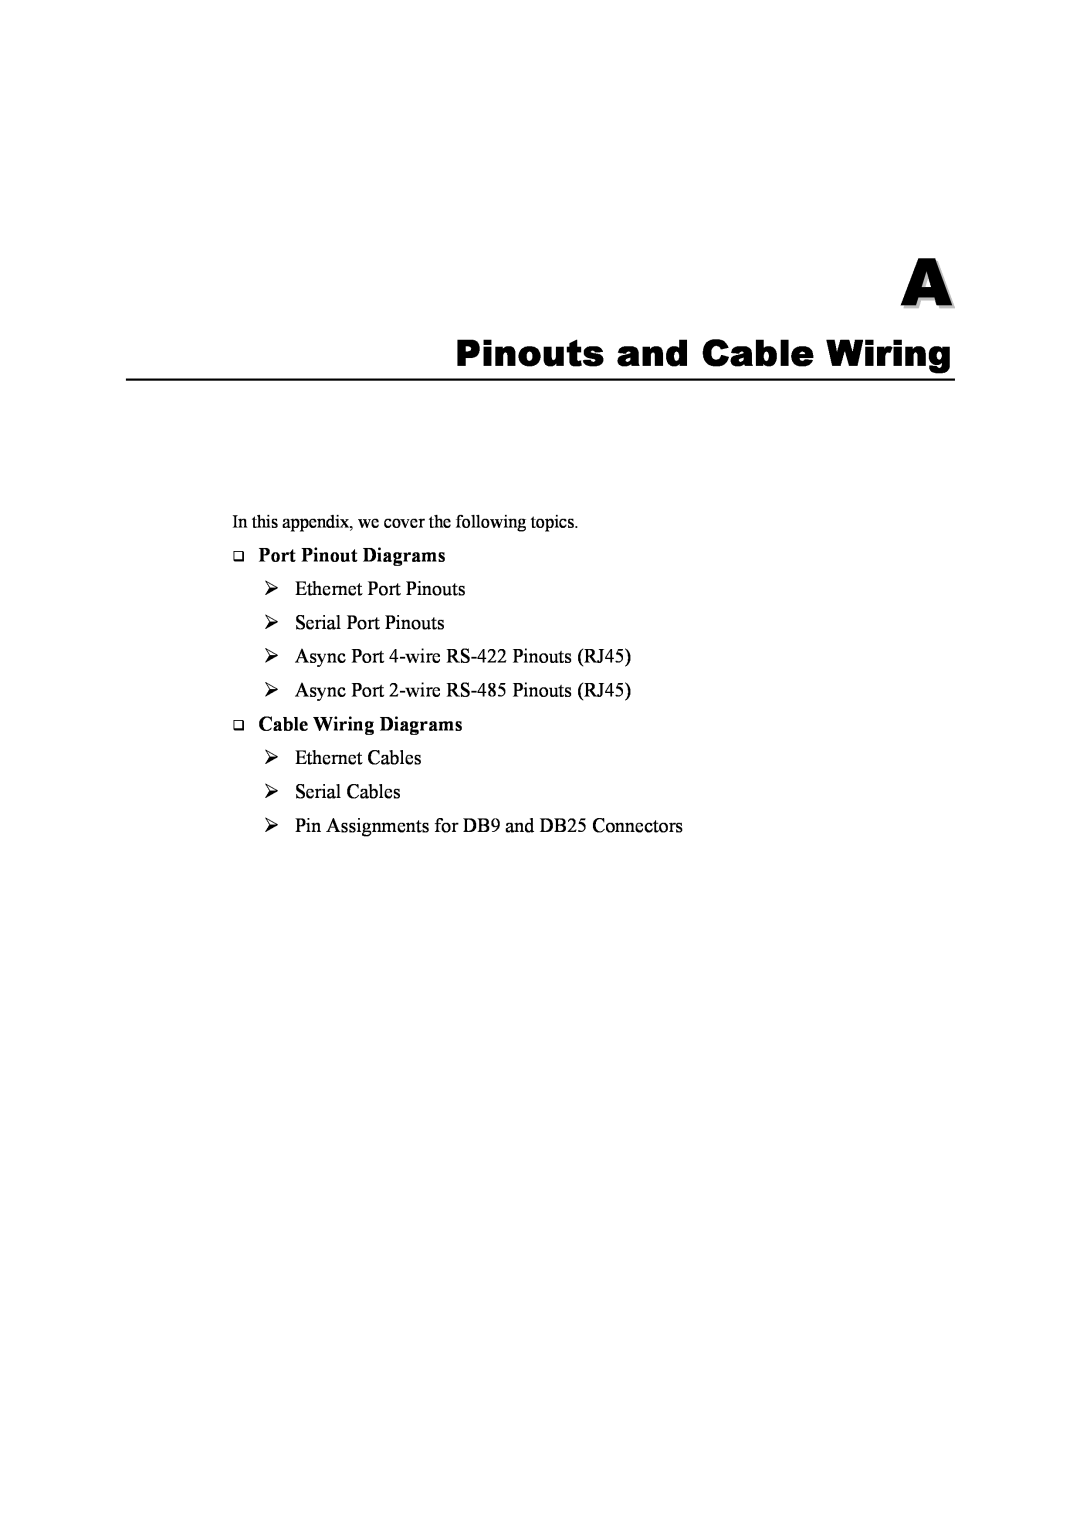 Moxa Technologies 5600 Pinouts and Cable Wiring, ‰ Port Pinout Diagrams, ¾ Ethernet Port Pinouts ¾ Serial Port Pinouts 